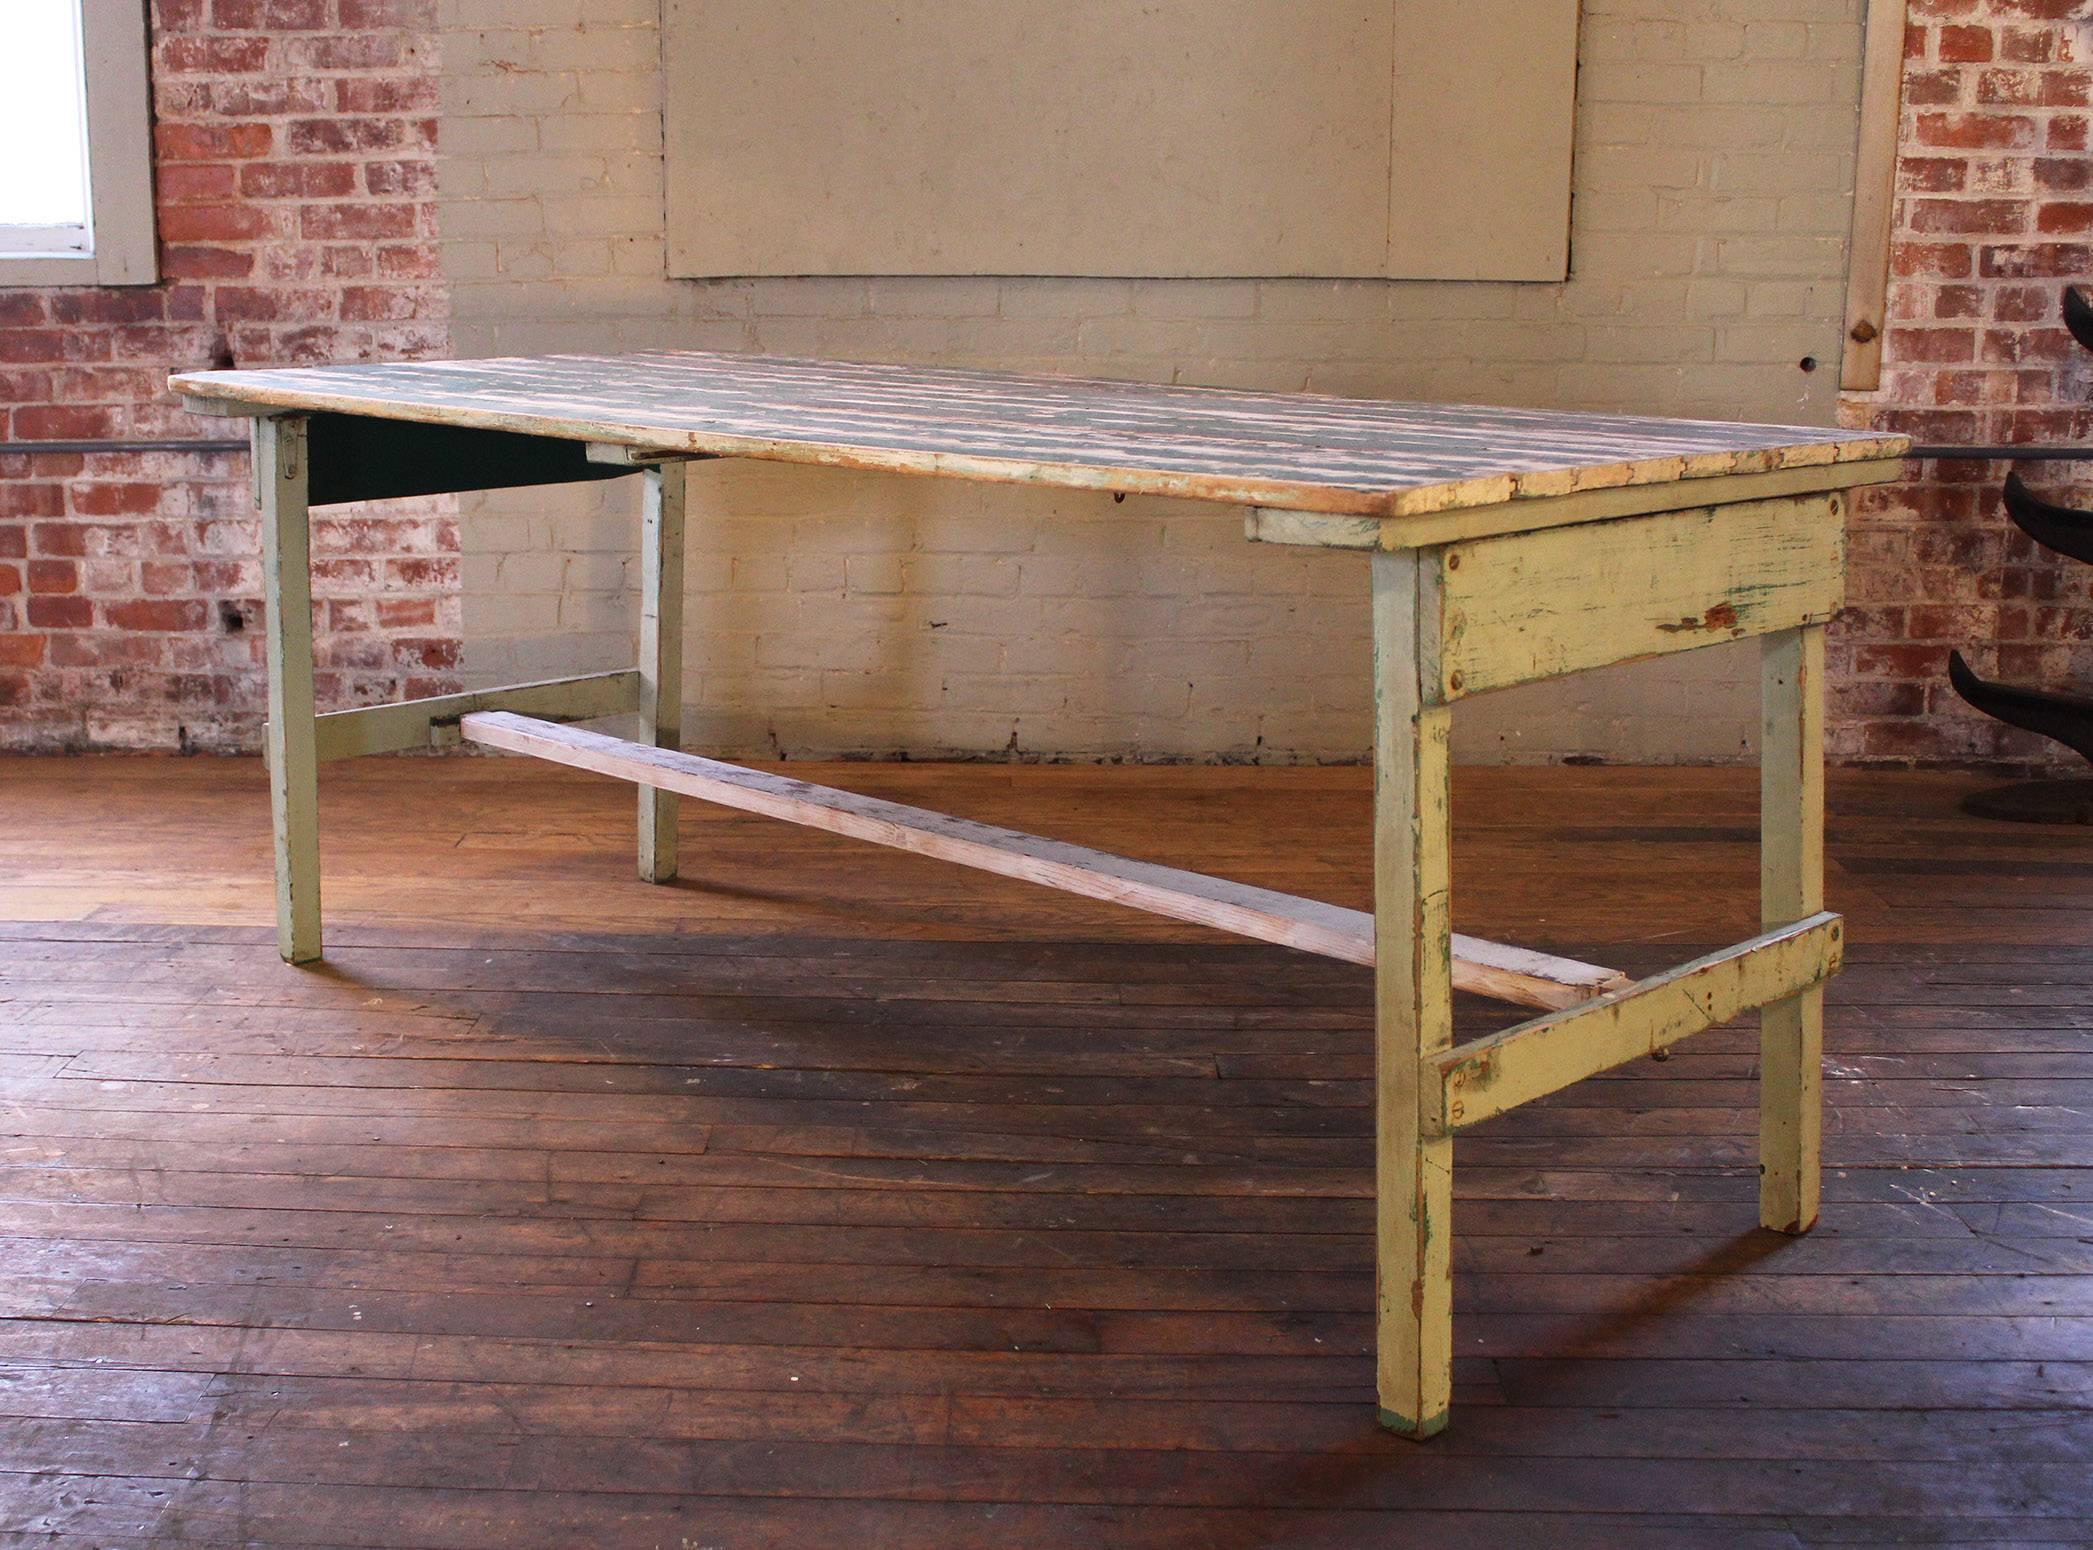 Vintage Industrial rustic farm folding painted wood dining work table. Beautiful patina on the old painted wood. Great space saving table. Table has movement to it due to the ability to fold up. More suitable as a display table for lighter objects.